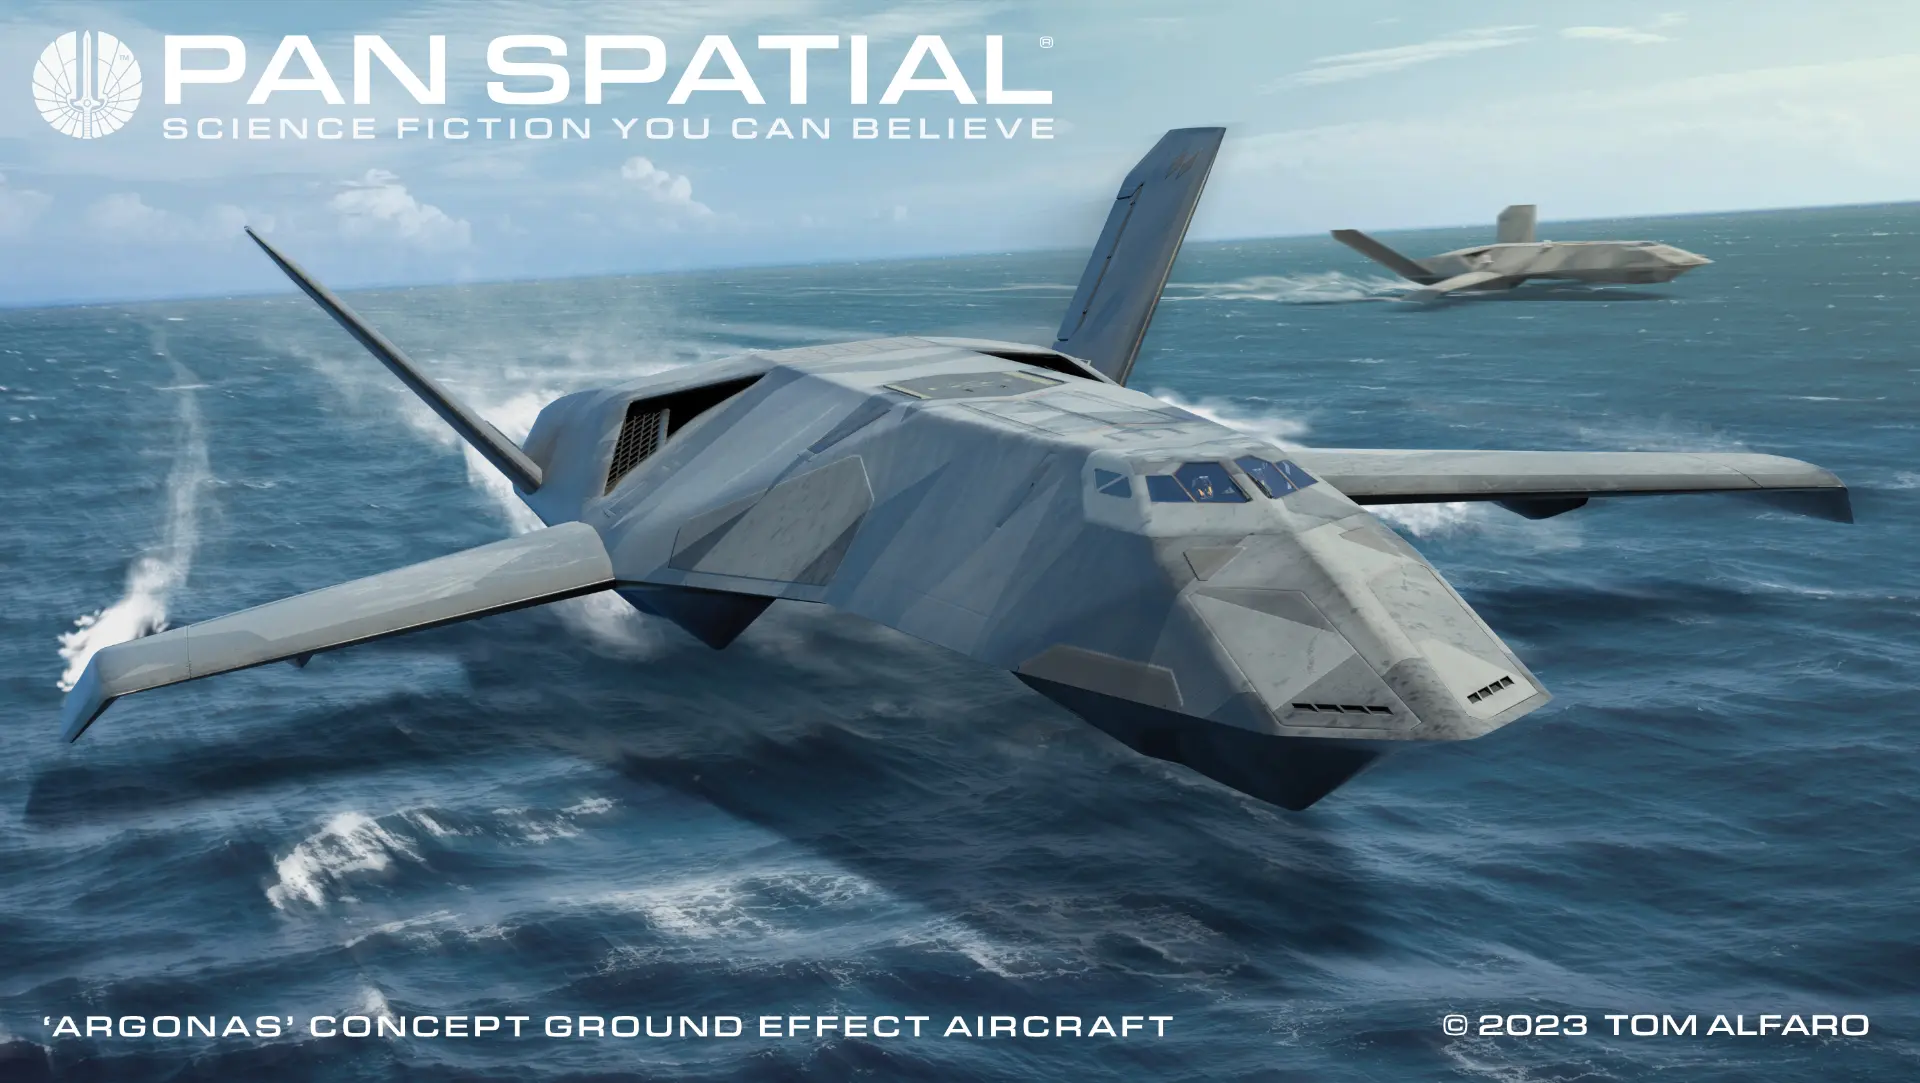 Two massive Pan Spatial Argonas ground effect aircraft fly at wavetop level above water.